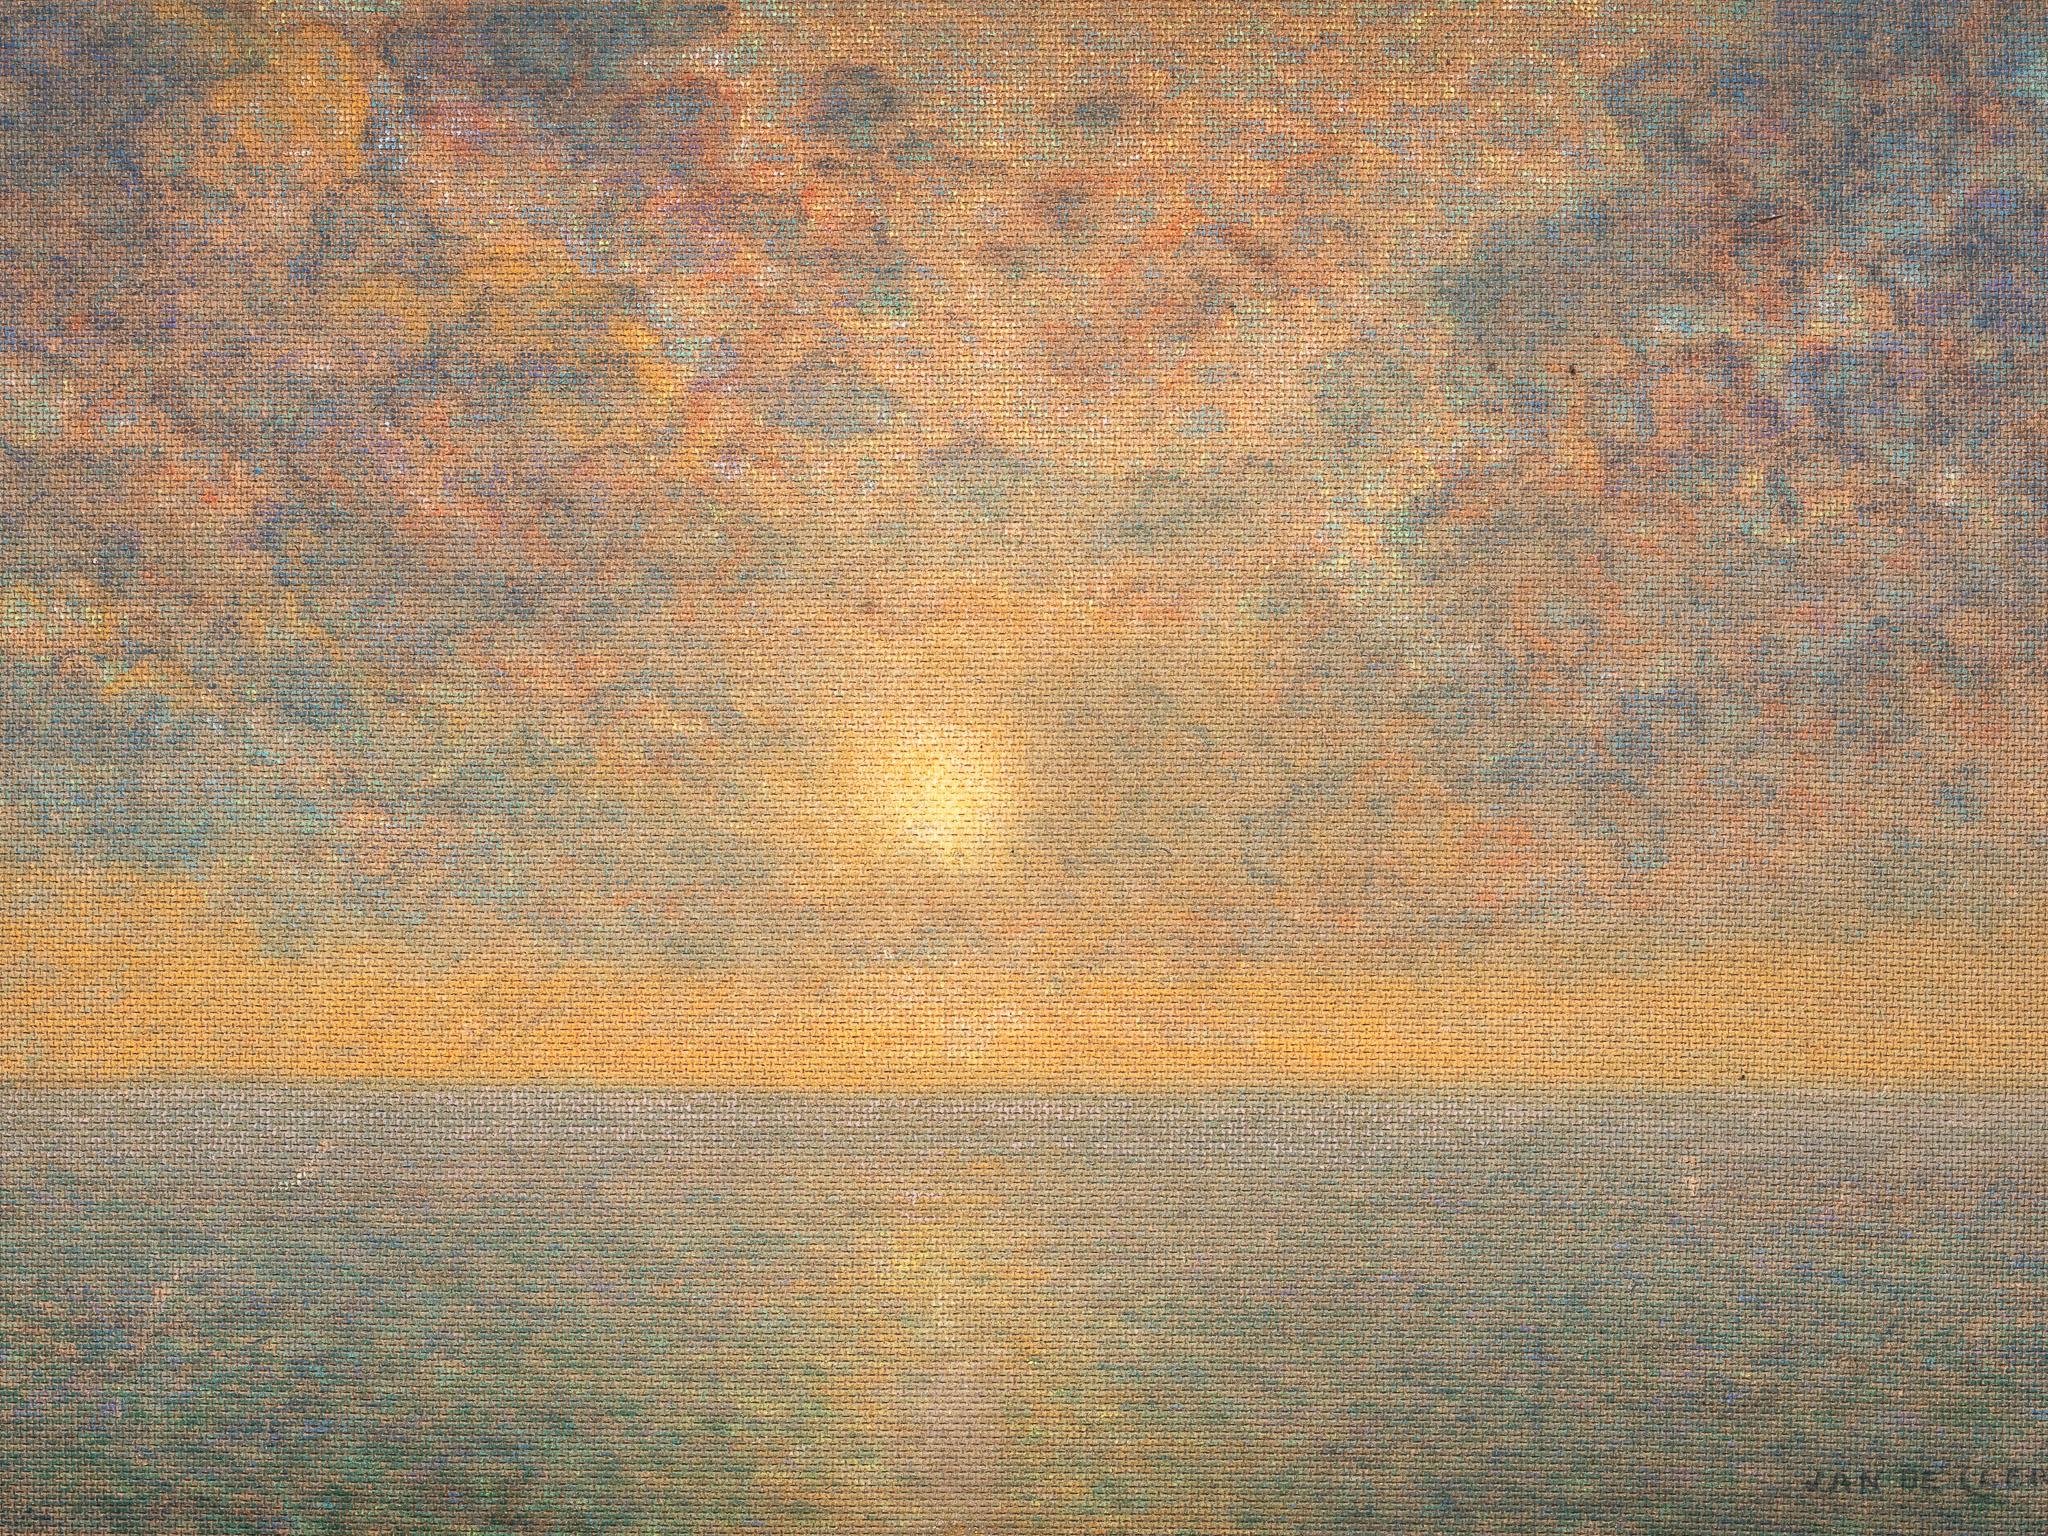 Unknown Landscape Painting - Sunset over the Sea, Jan de Clerck (1891 - 1964), Oil on Unalit, Signed.